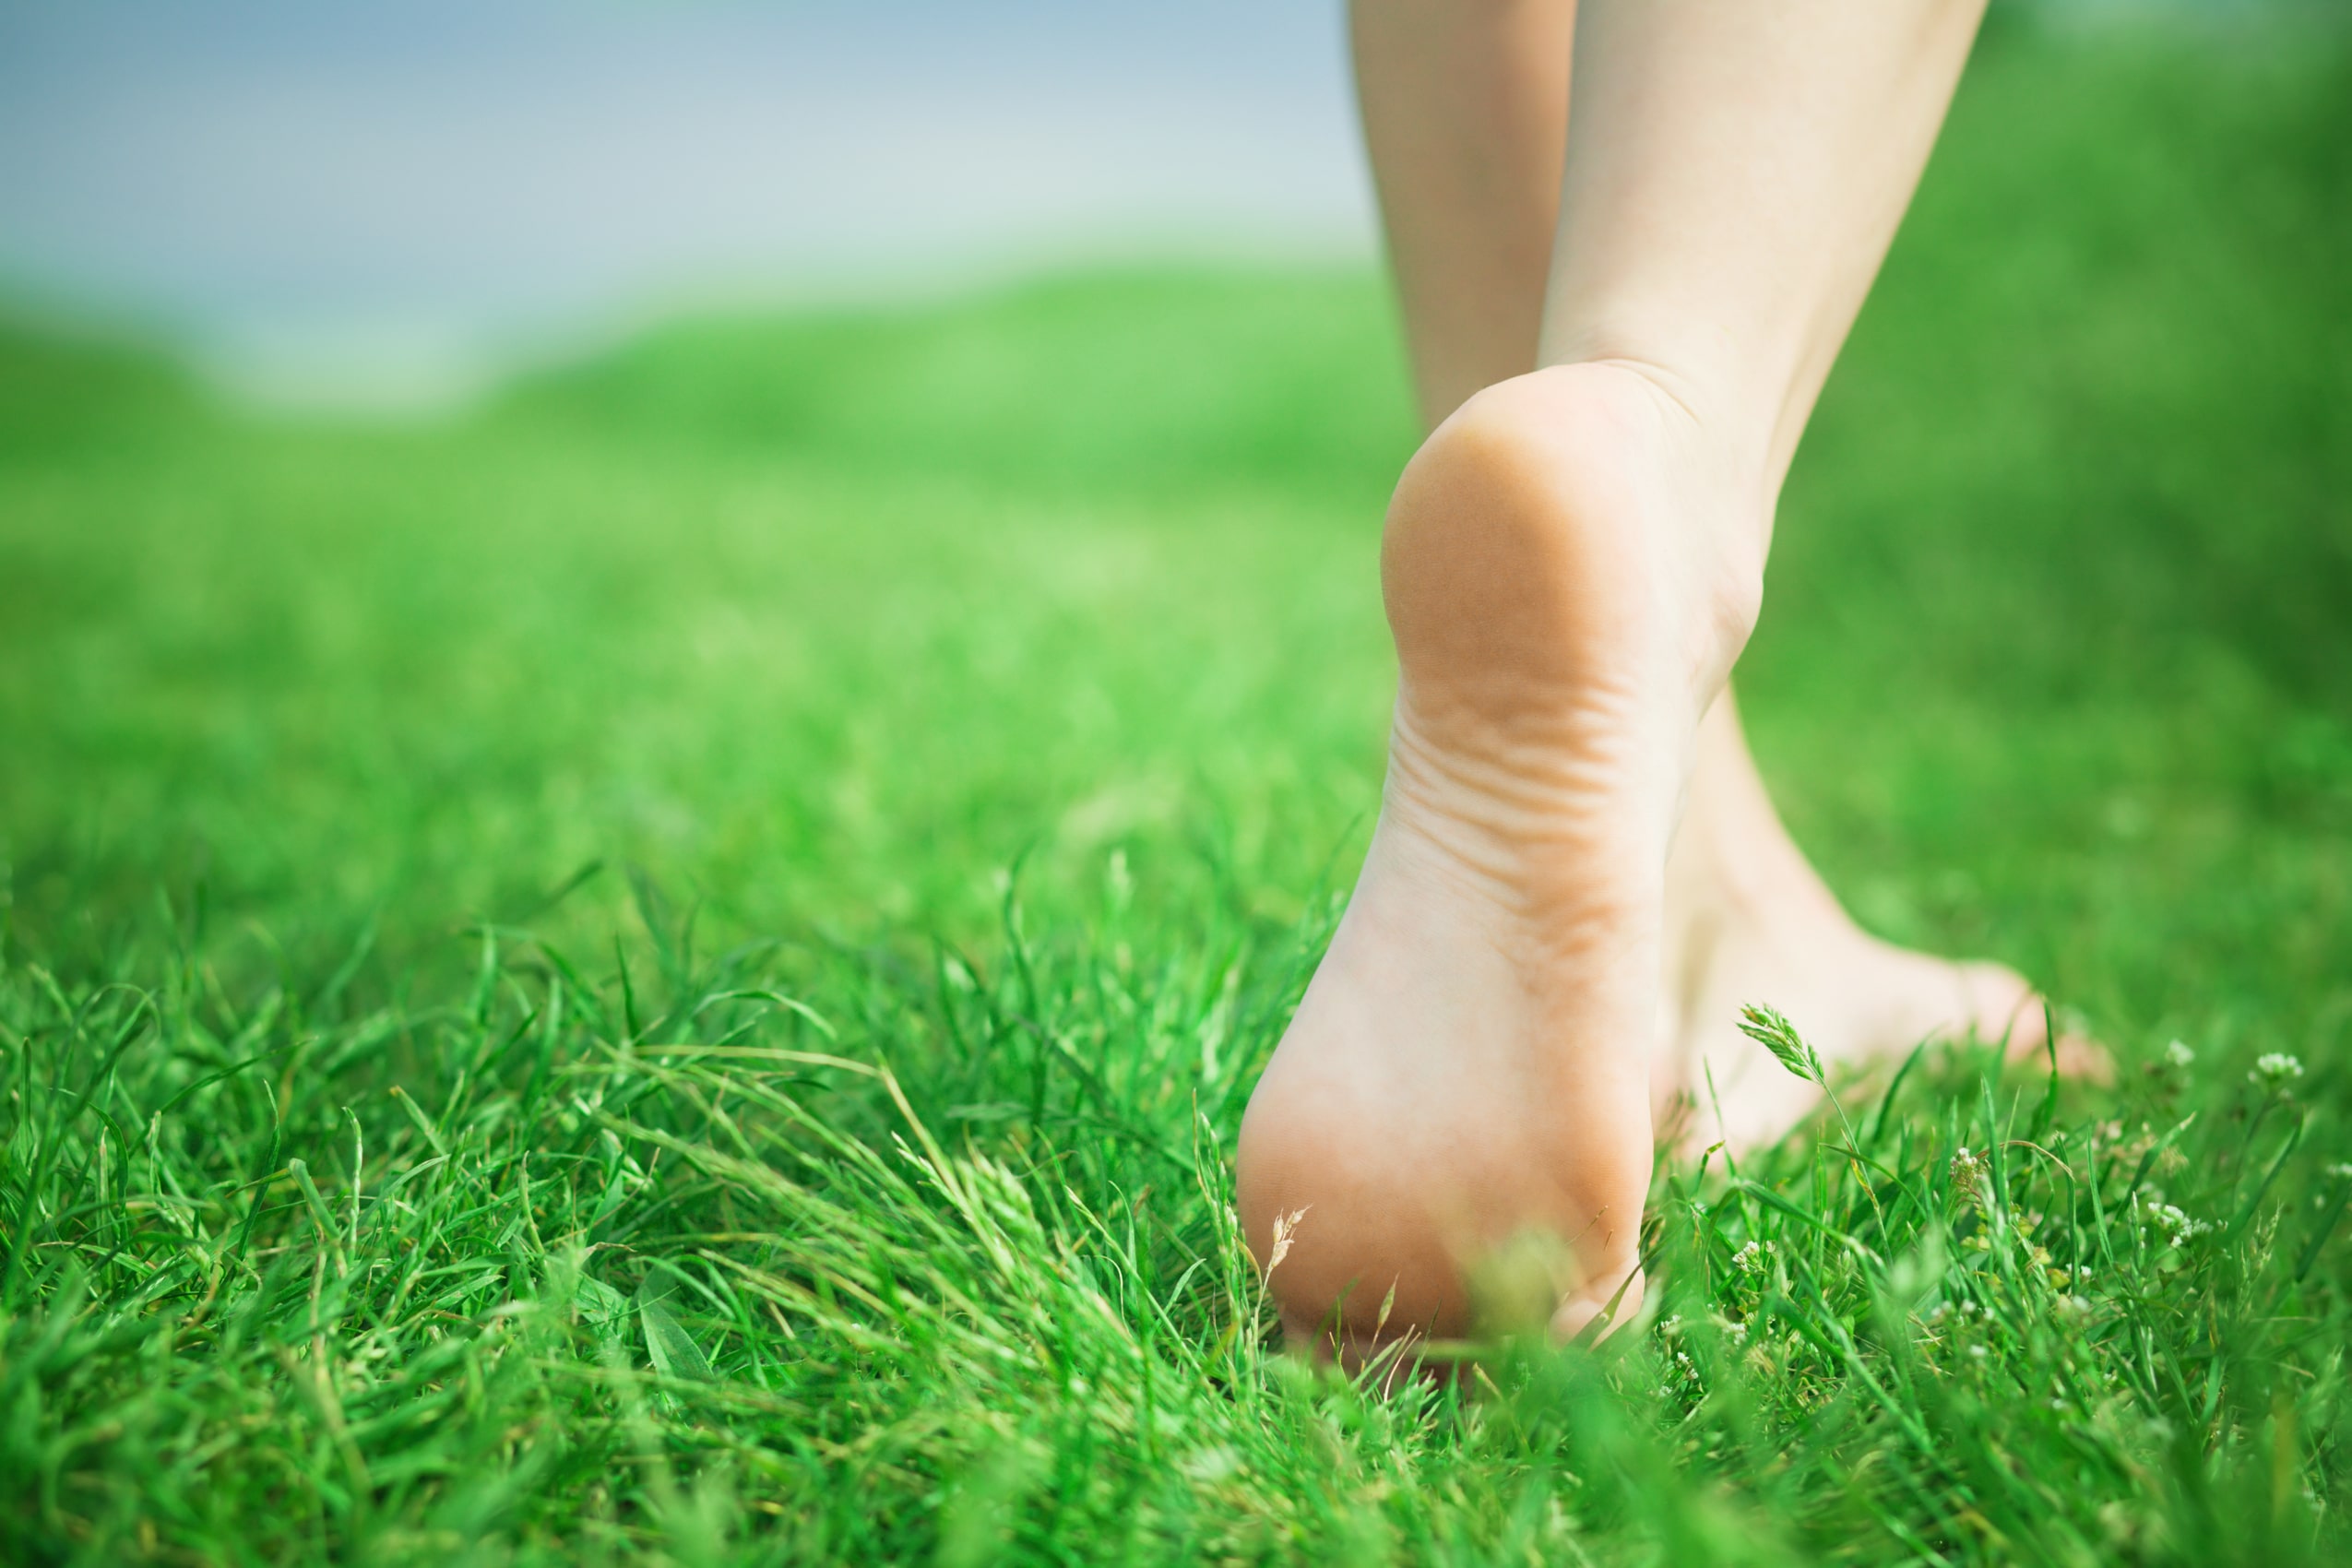 Grounding yourself with earthing products